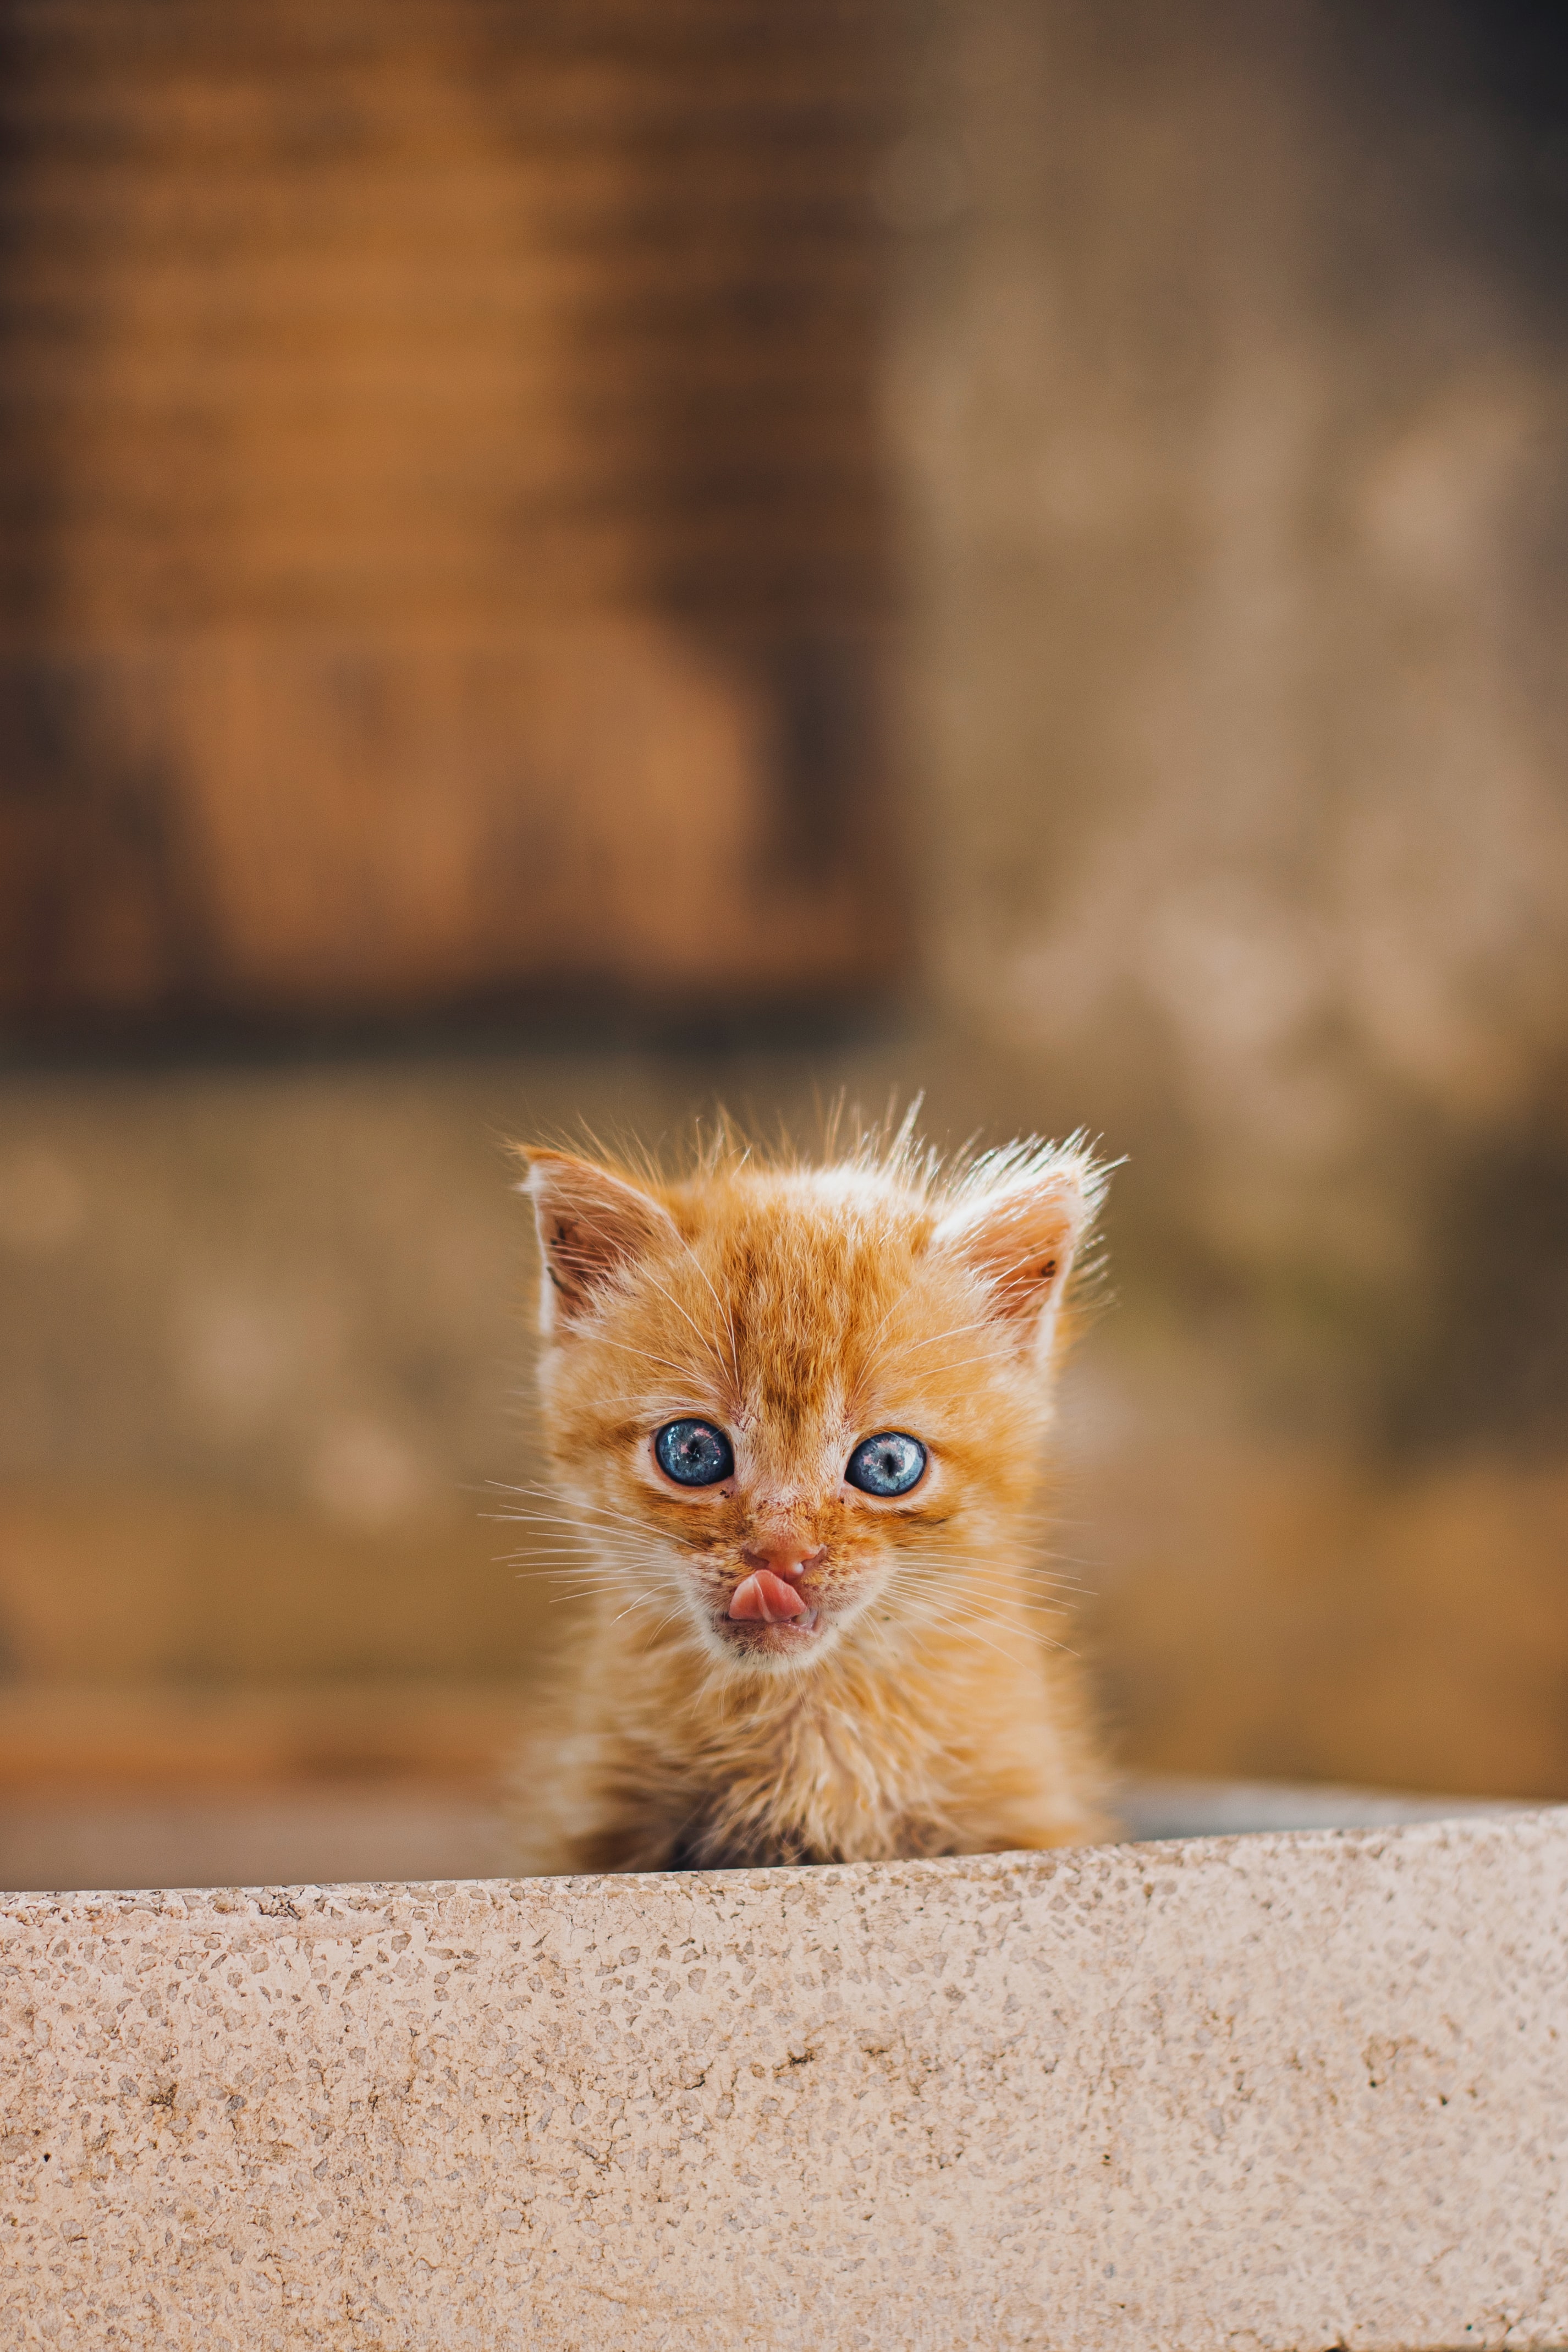 sweetheart, animals, red, kitty, kitten, nice, protruding tongue, tongue stuck out, redhead wallpaper for mobile